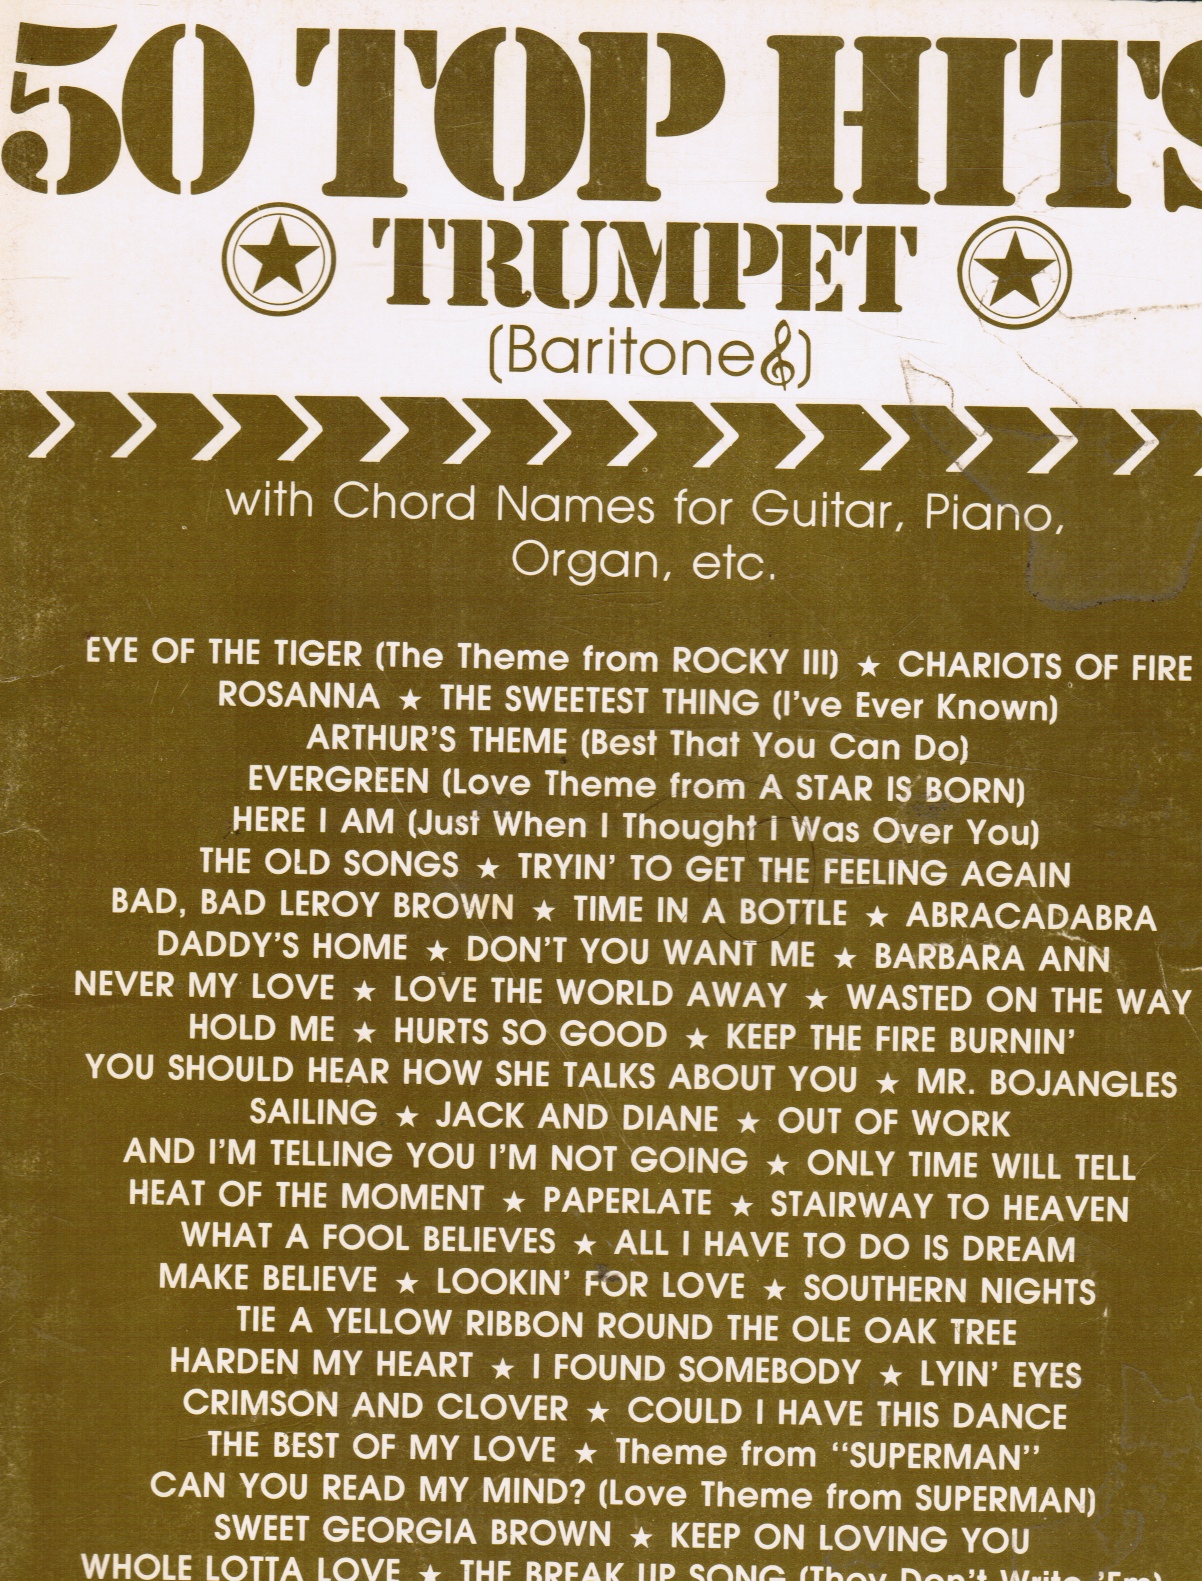 CAPPUCCIO, GERRY (ARRANGED AND EDITED BY) - 50 Top Hits Trumpet (Baritone) with Chord Names for Guitar, Piano, Organ, Etc